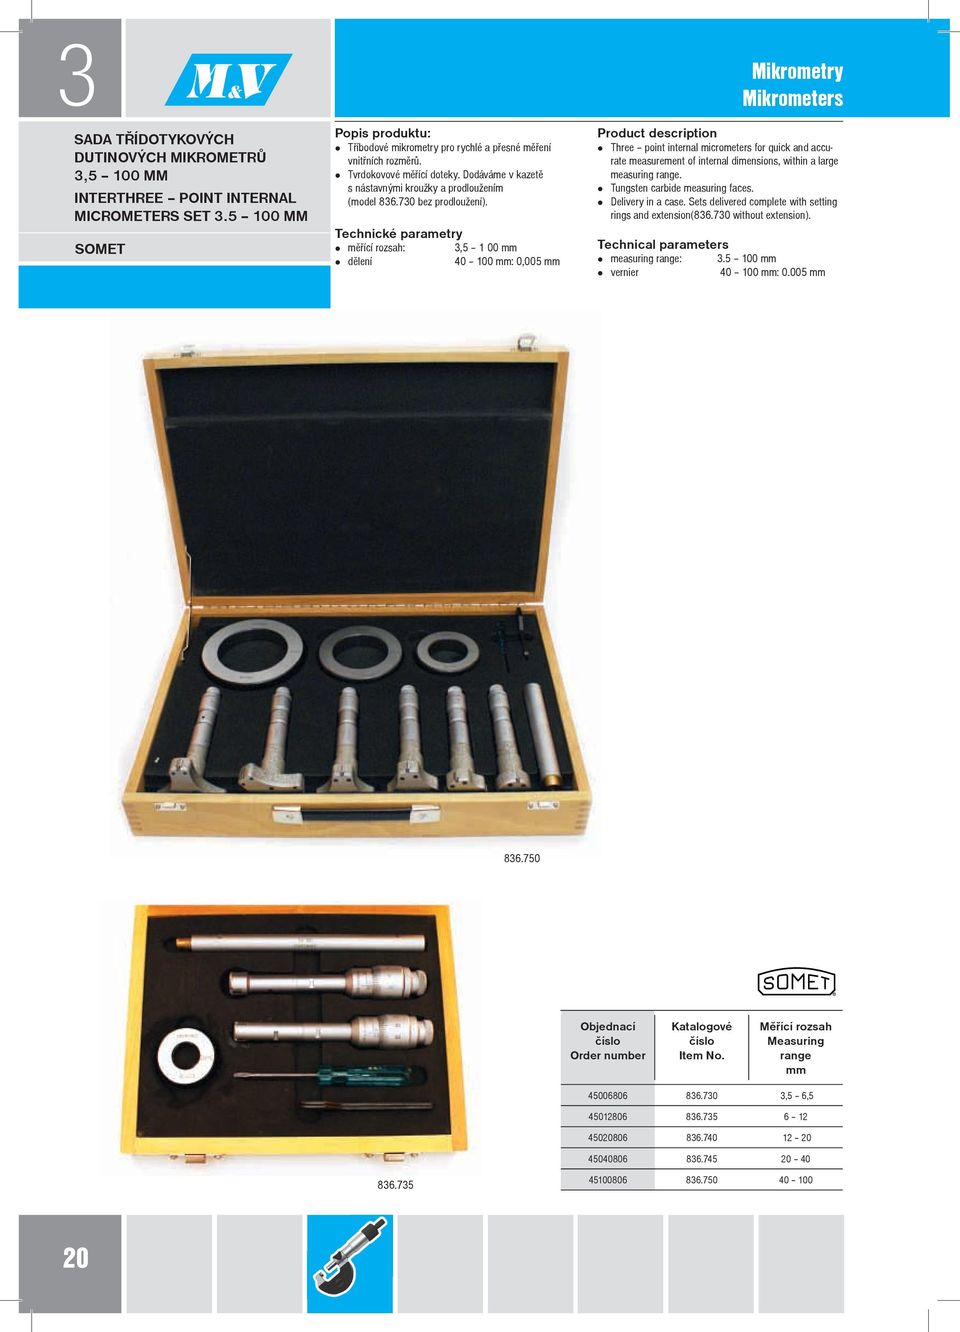 3,5 1 00 dělení 40 100 : 0,005 Mikrometry Mikrometers Three point internal micrometers for quick and accurate measurement of internal dimensions, within a large measuring.